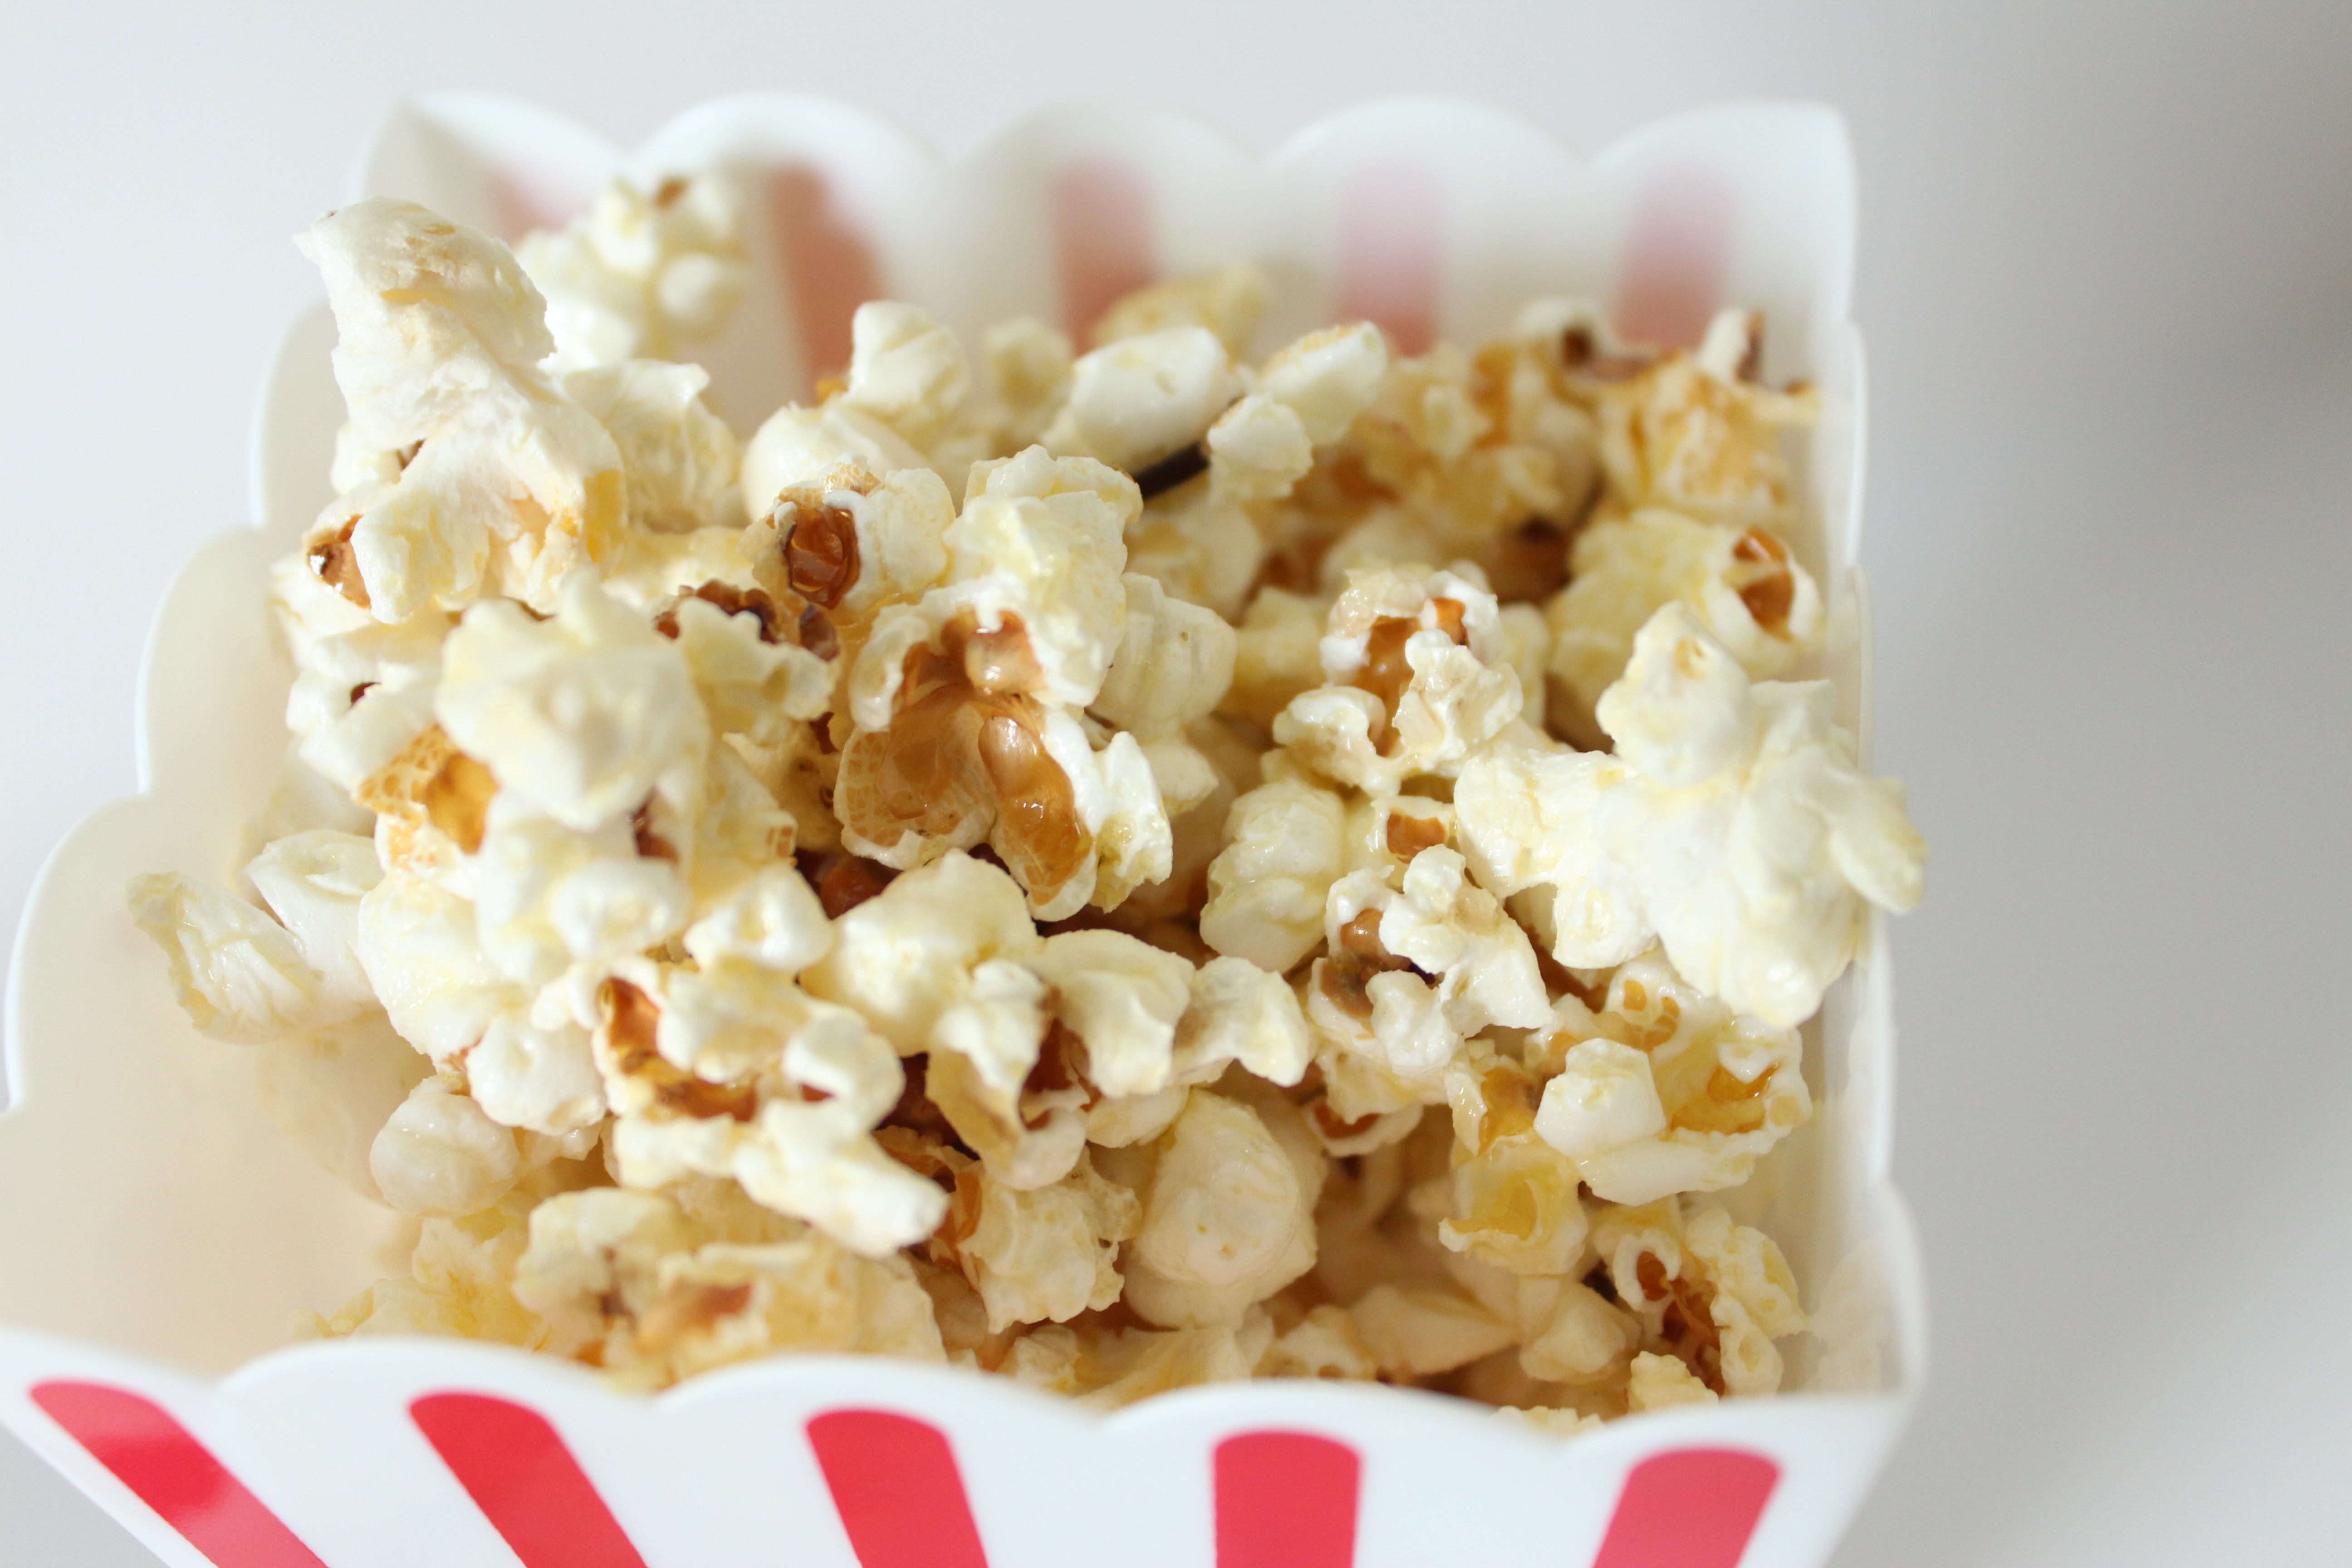 By making your own popcorn at home, you can easily enhance the buttery flavors by adding other herbs and spices.